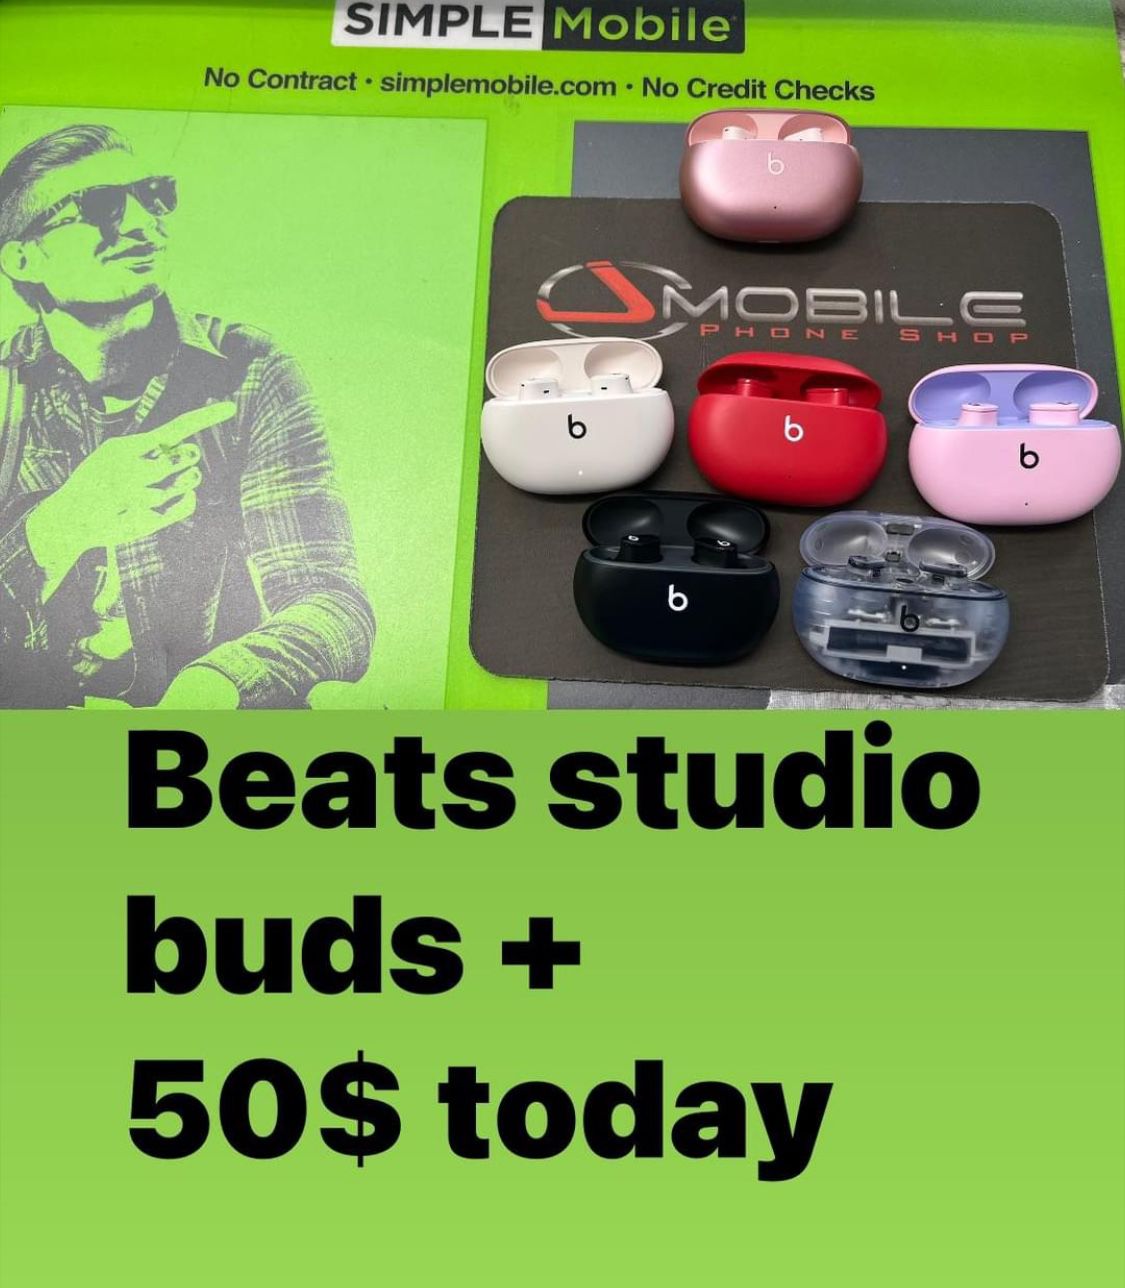 Beats Solo Buds $50 Apple Watch’s From $99